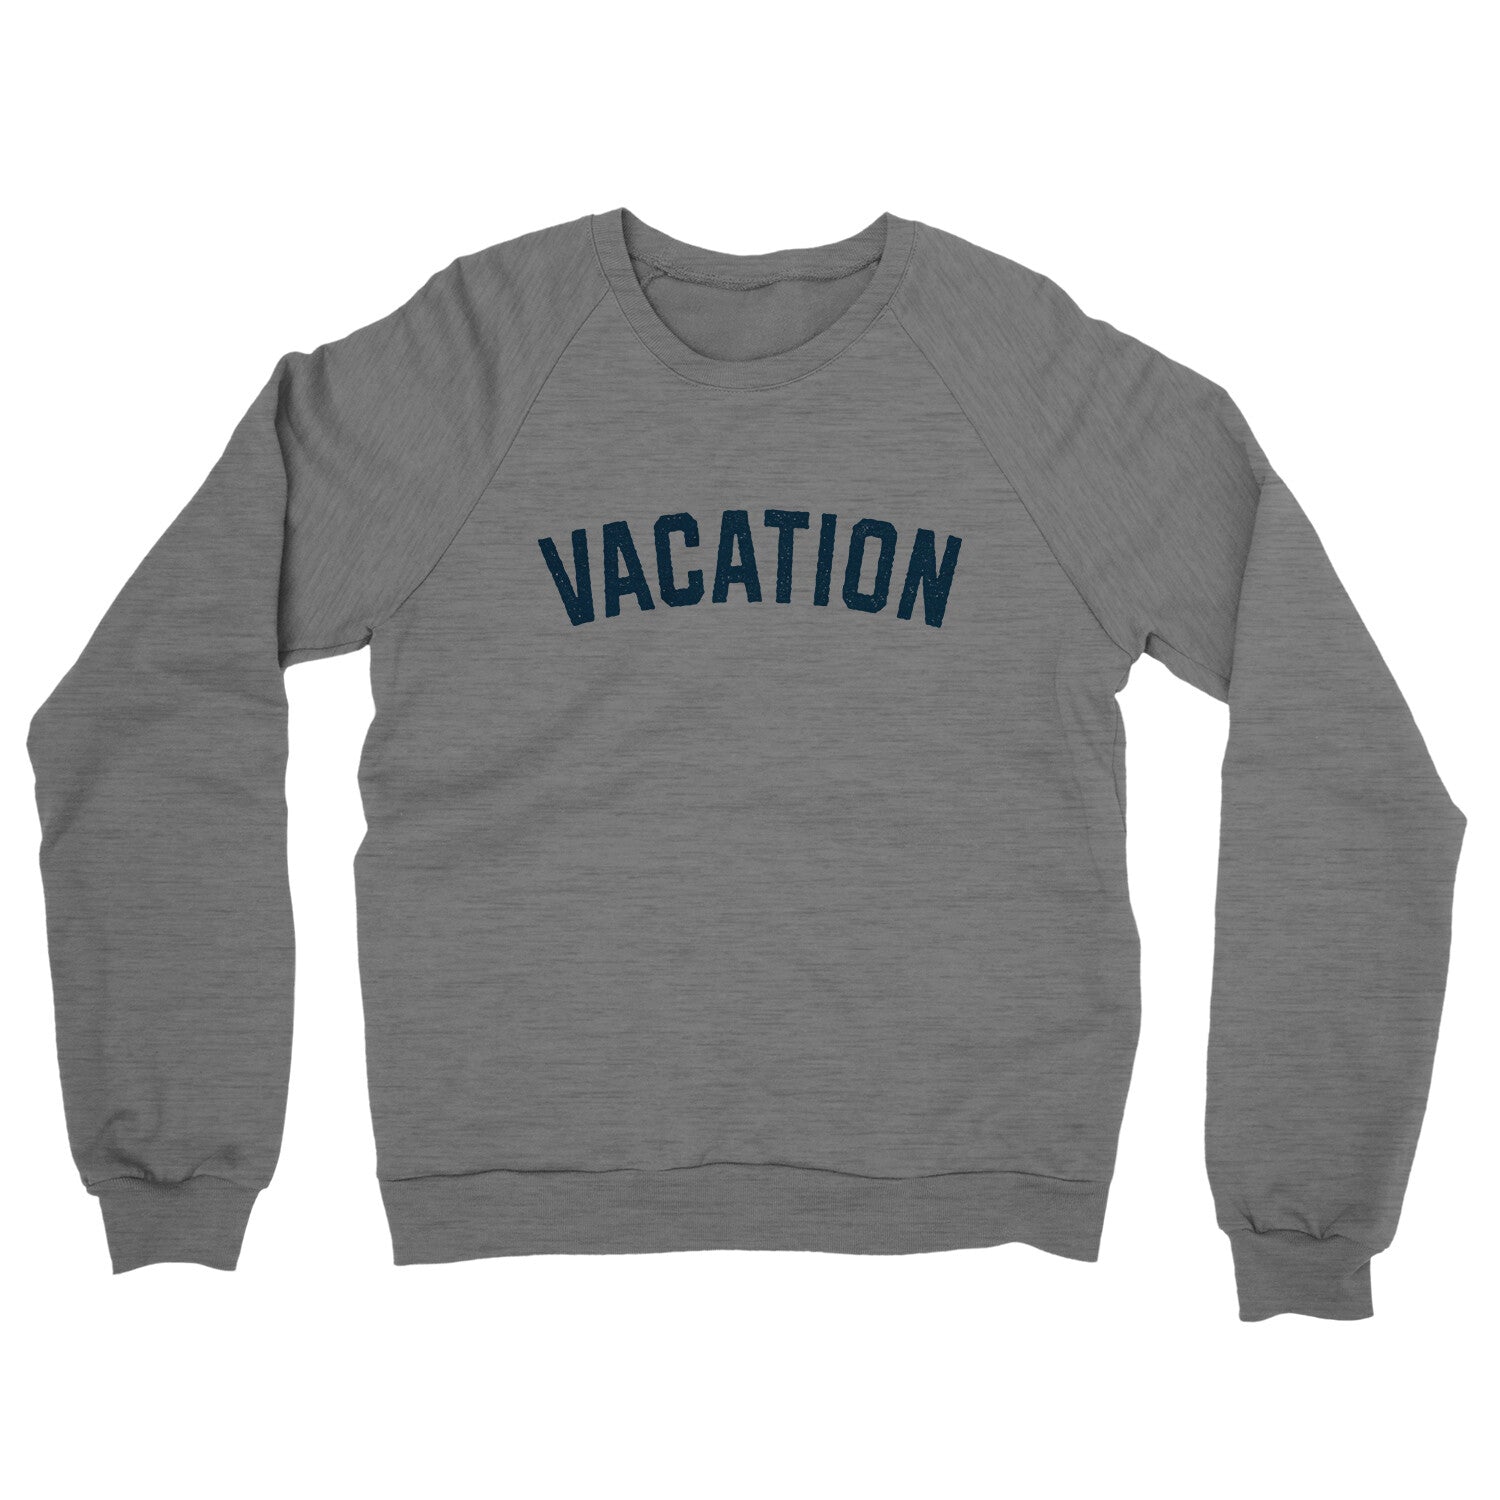 Vacation in Graphite Heather Color